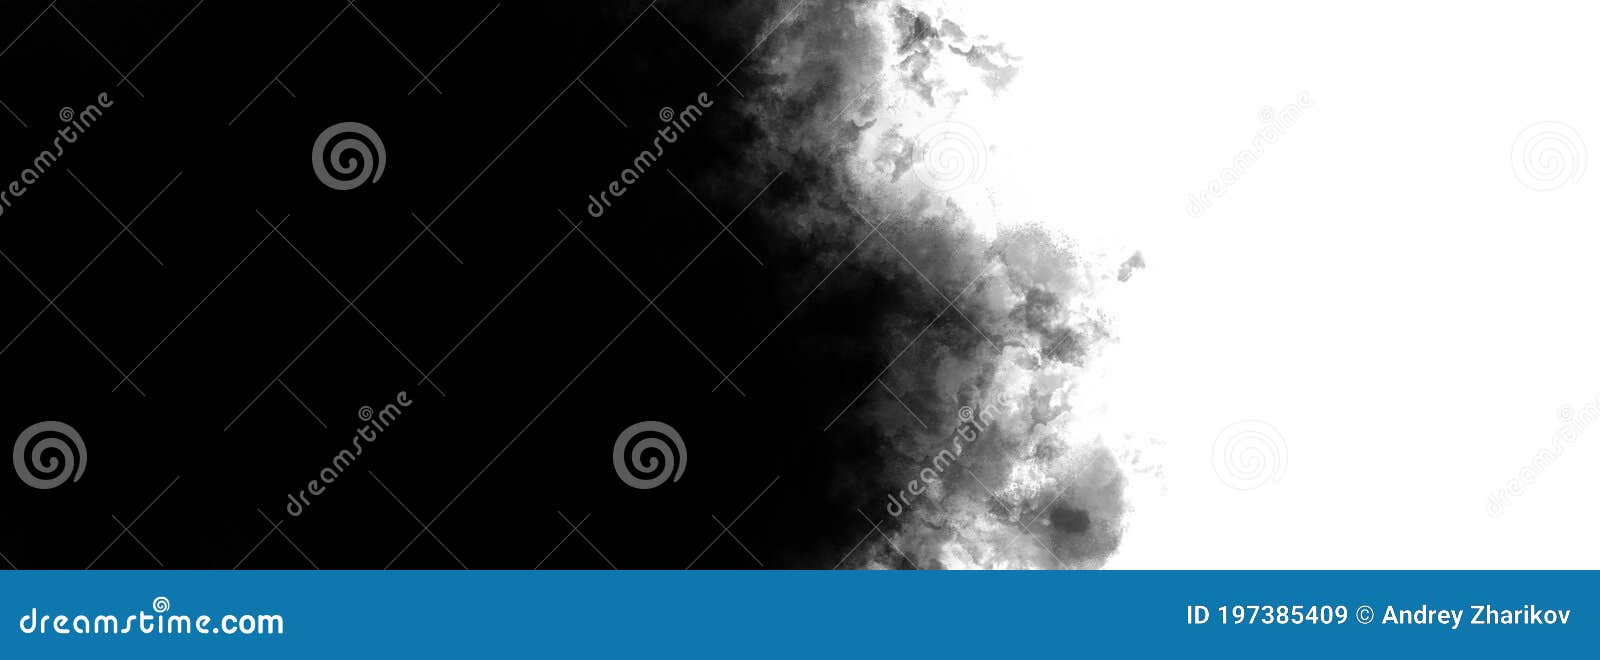 Dark Clouds on a White Background. Smoke Stock Image - Image of spots,  eruption: 197385409